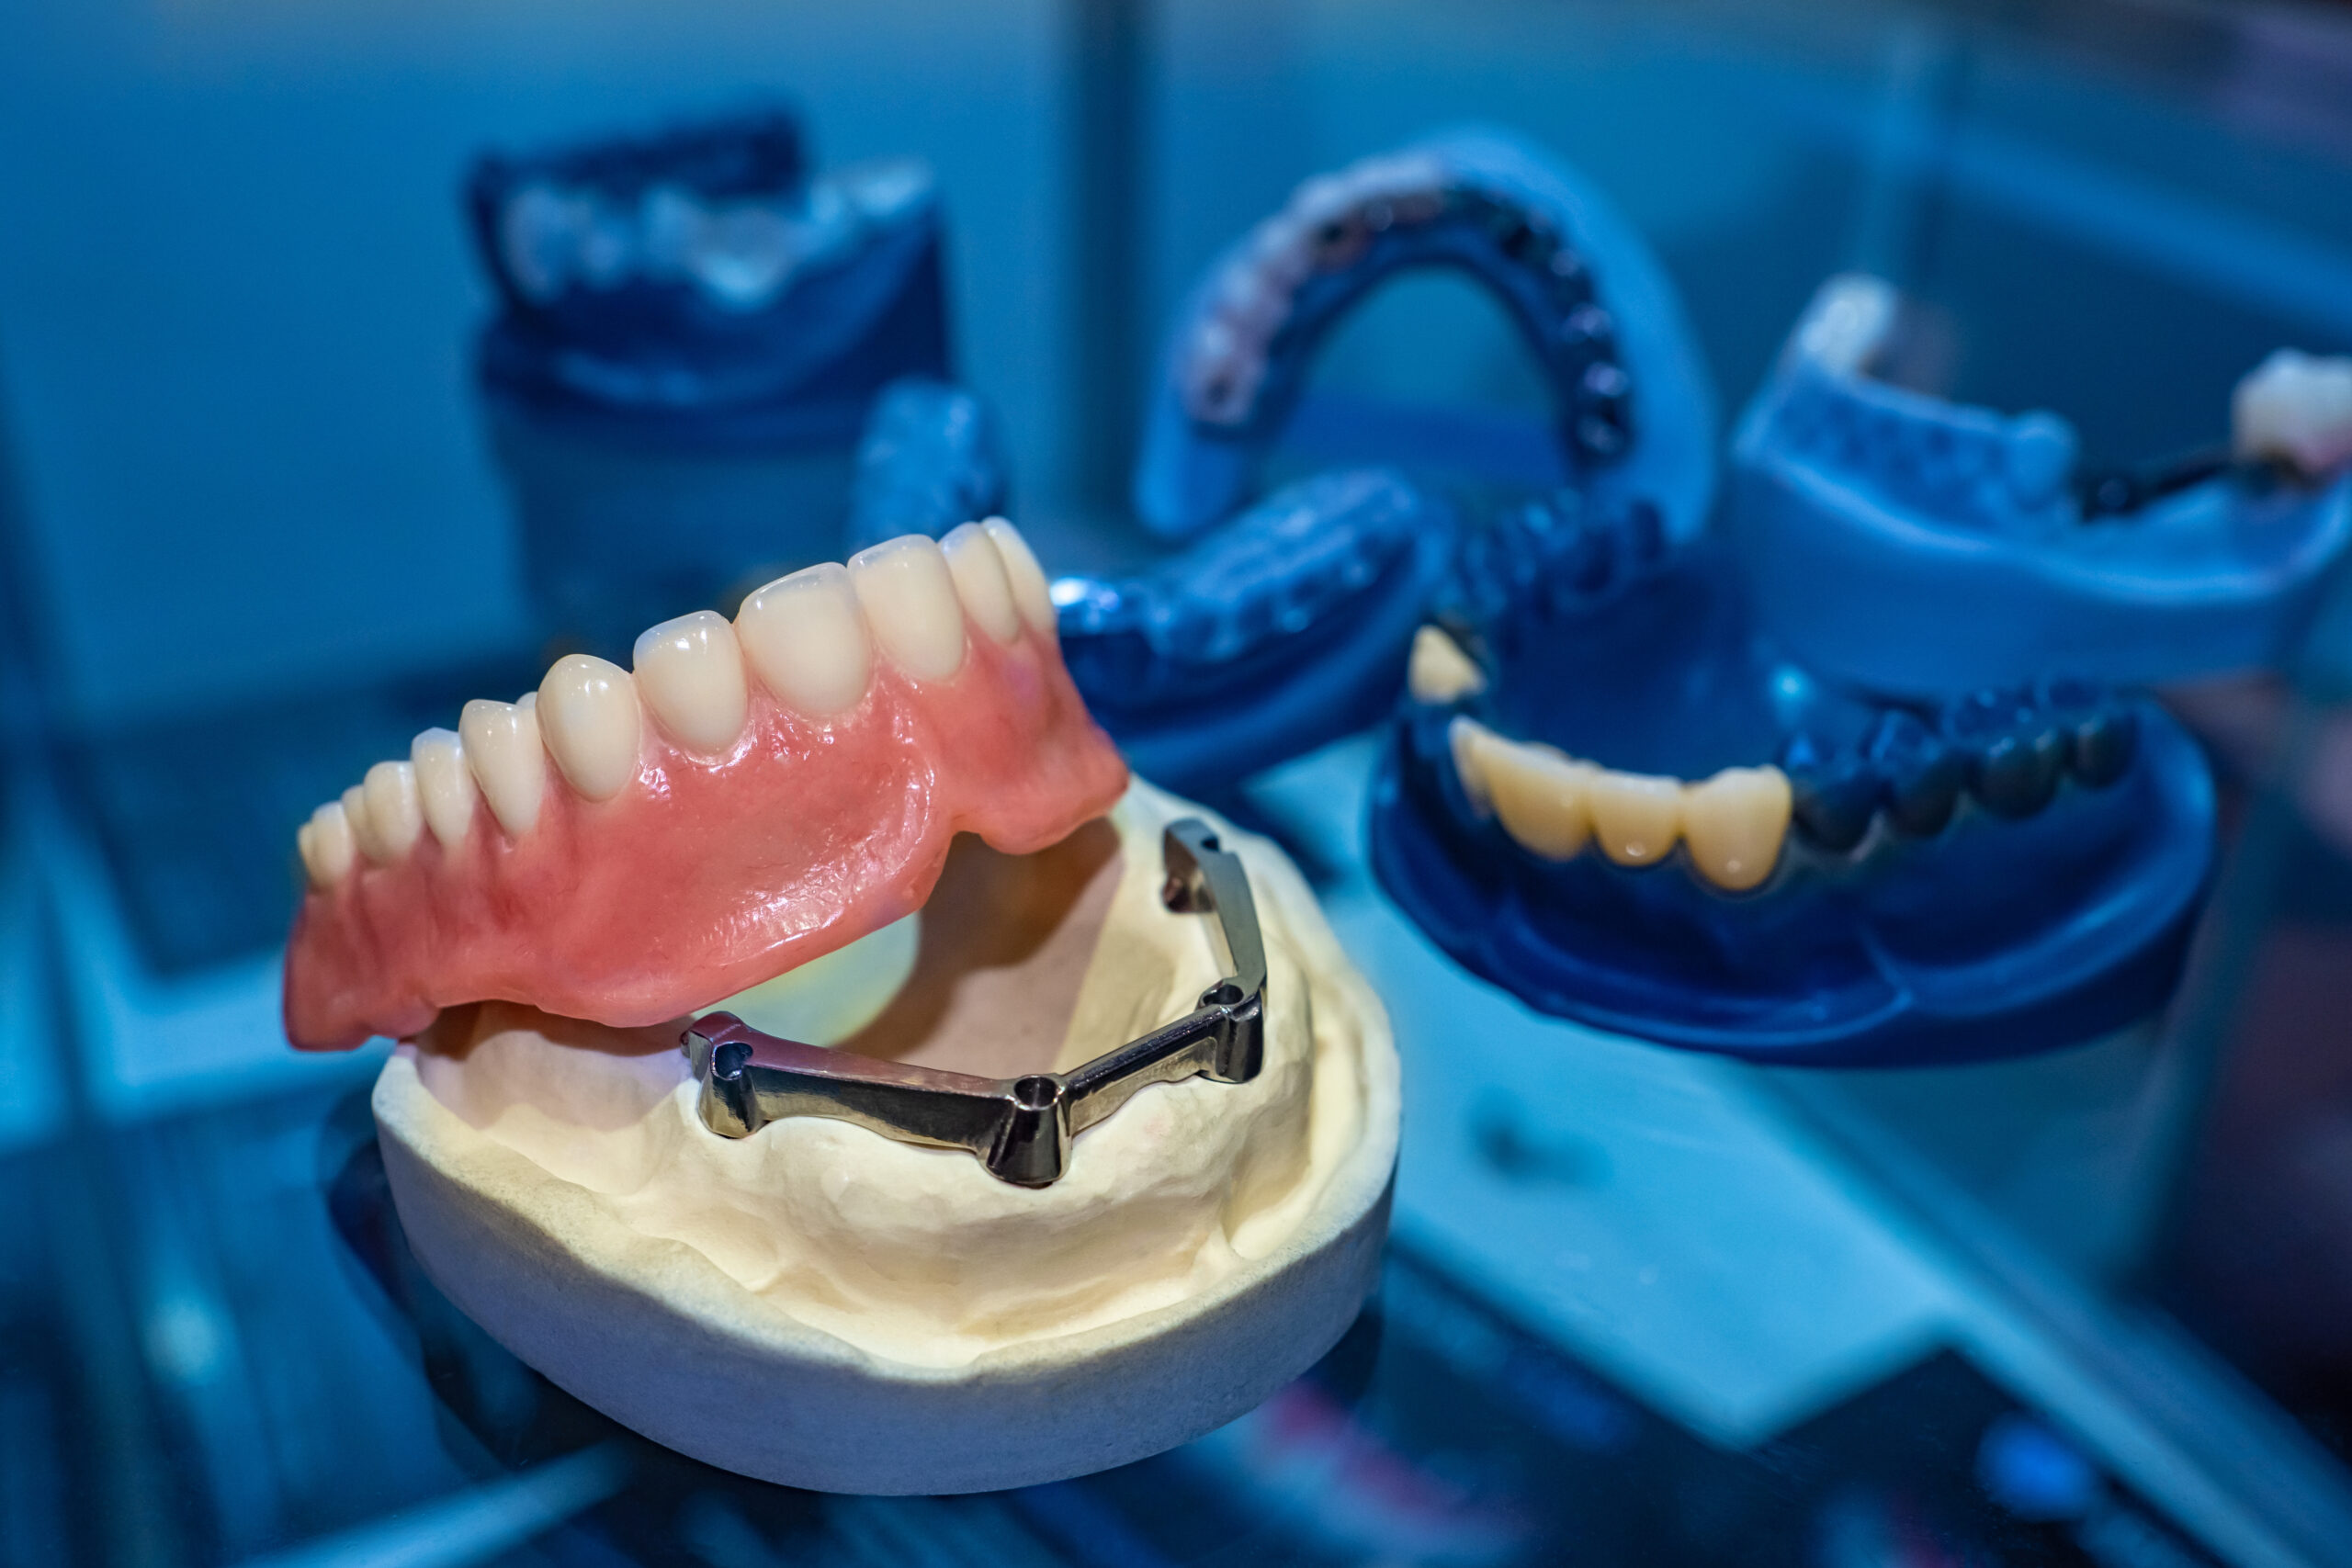 Does Anything Happen To My Jawbone If I Don’t Immediately Replace My Missing Teeth With Dental Implants?